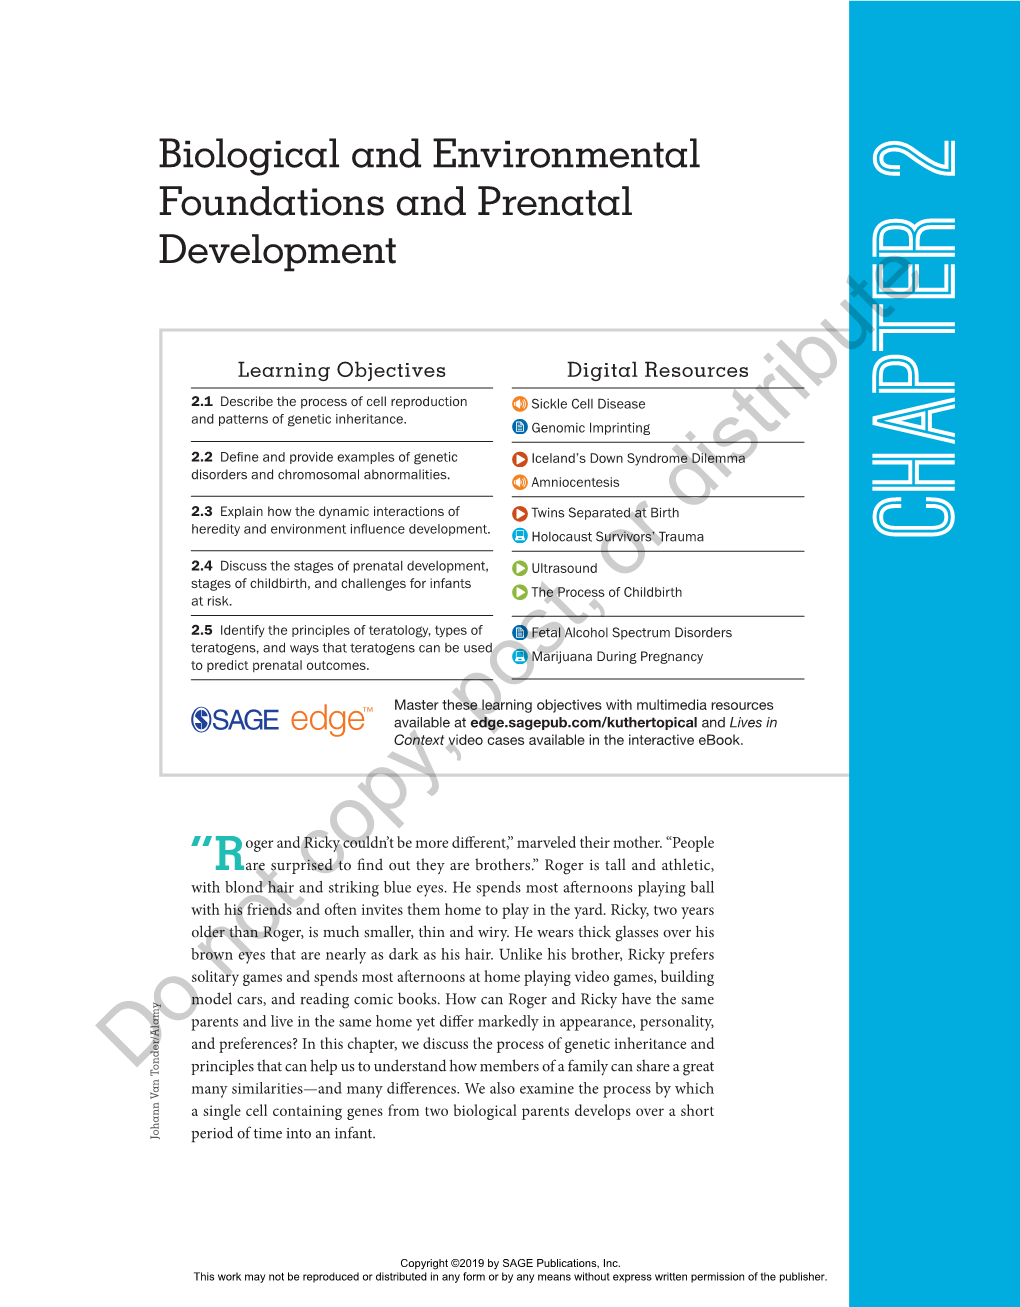 Biological and Environmental Foundations and Prenatal Development